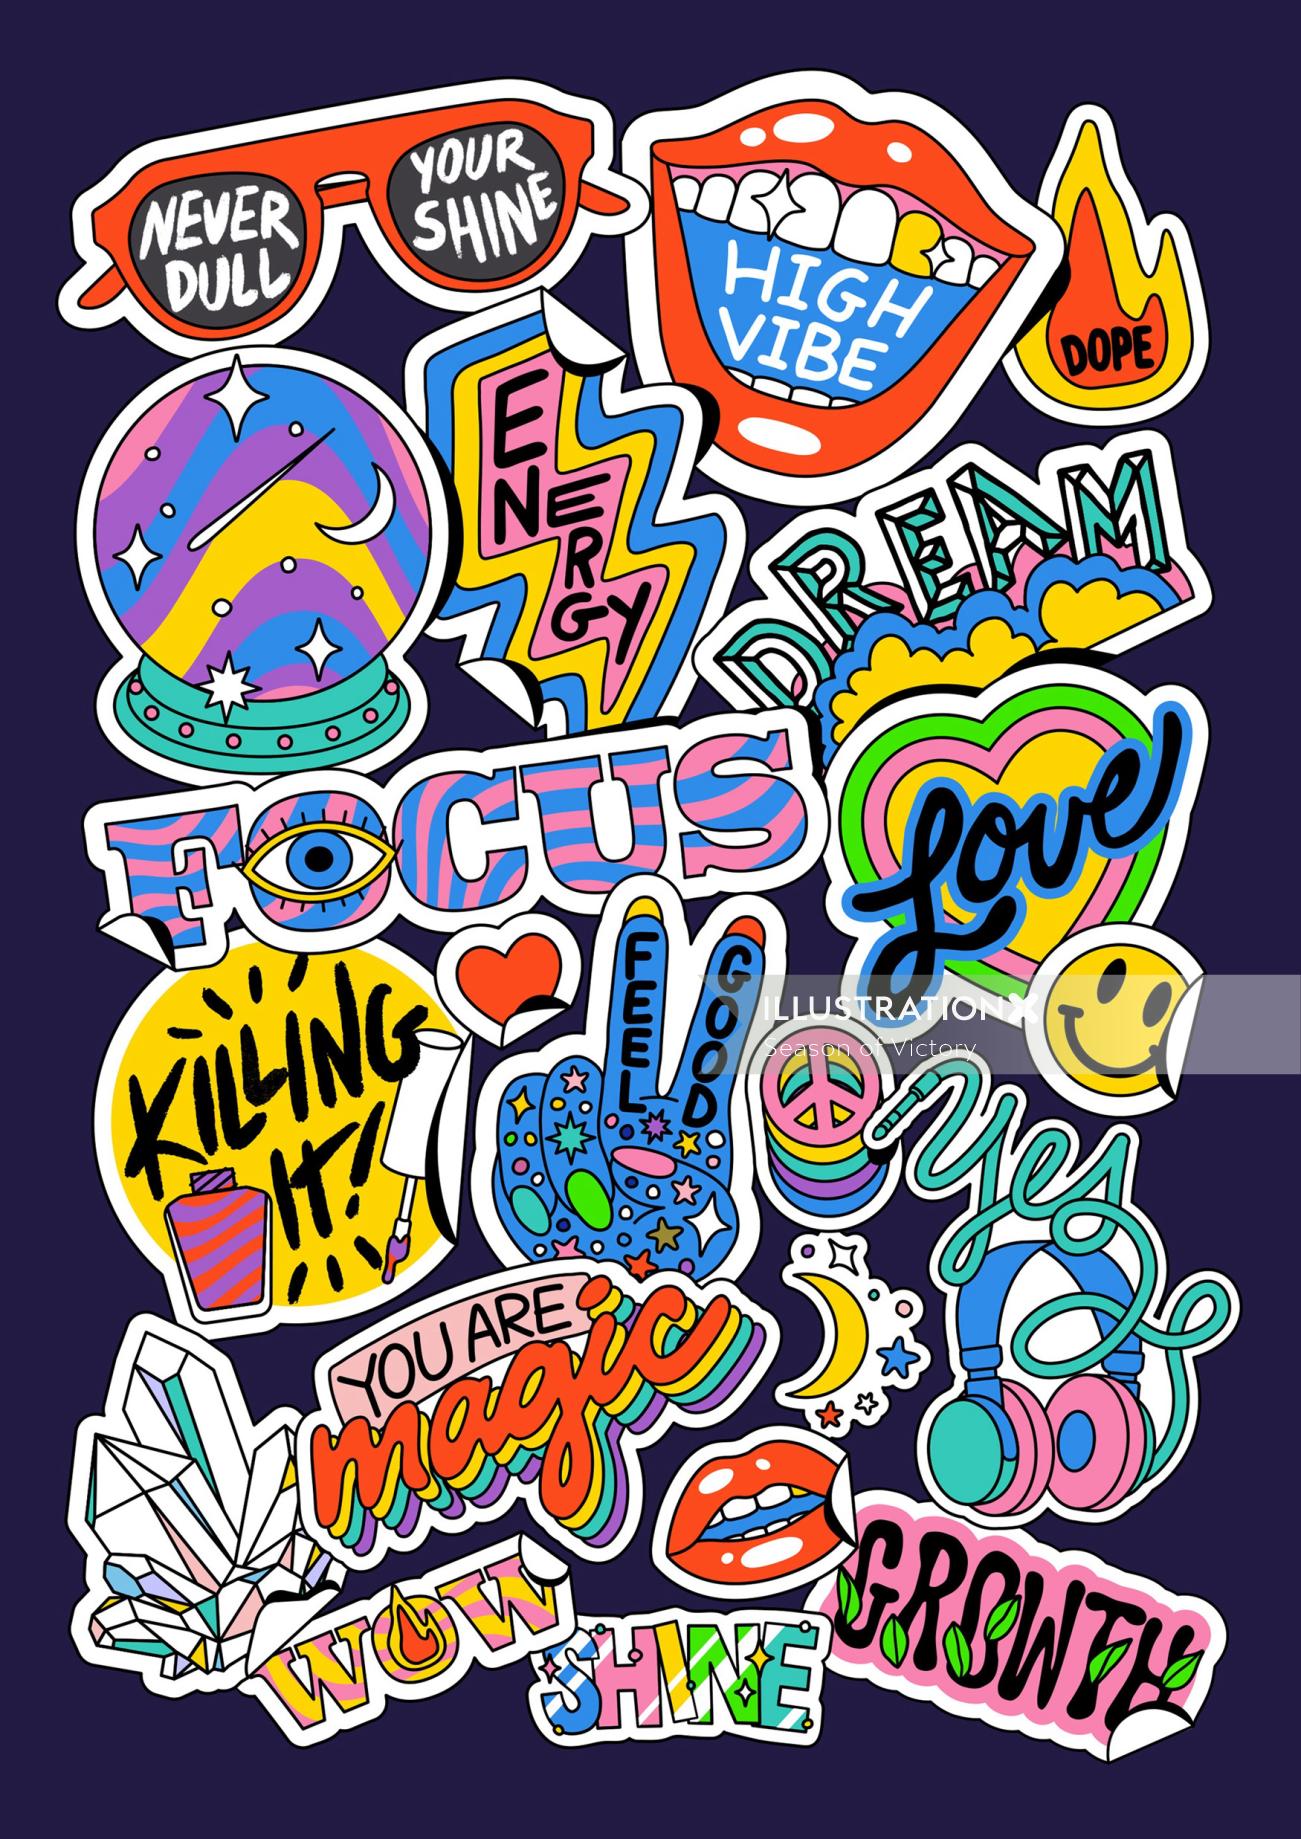 High Vibe illustrated graphic stickers